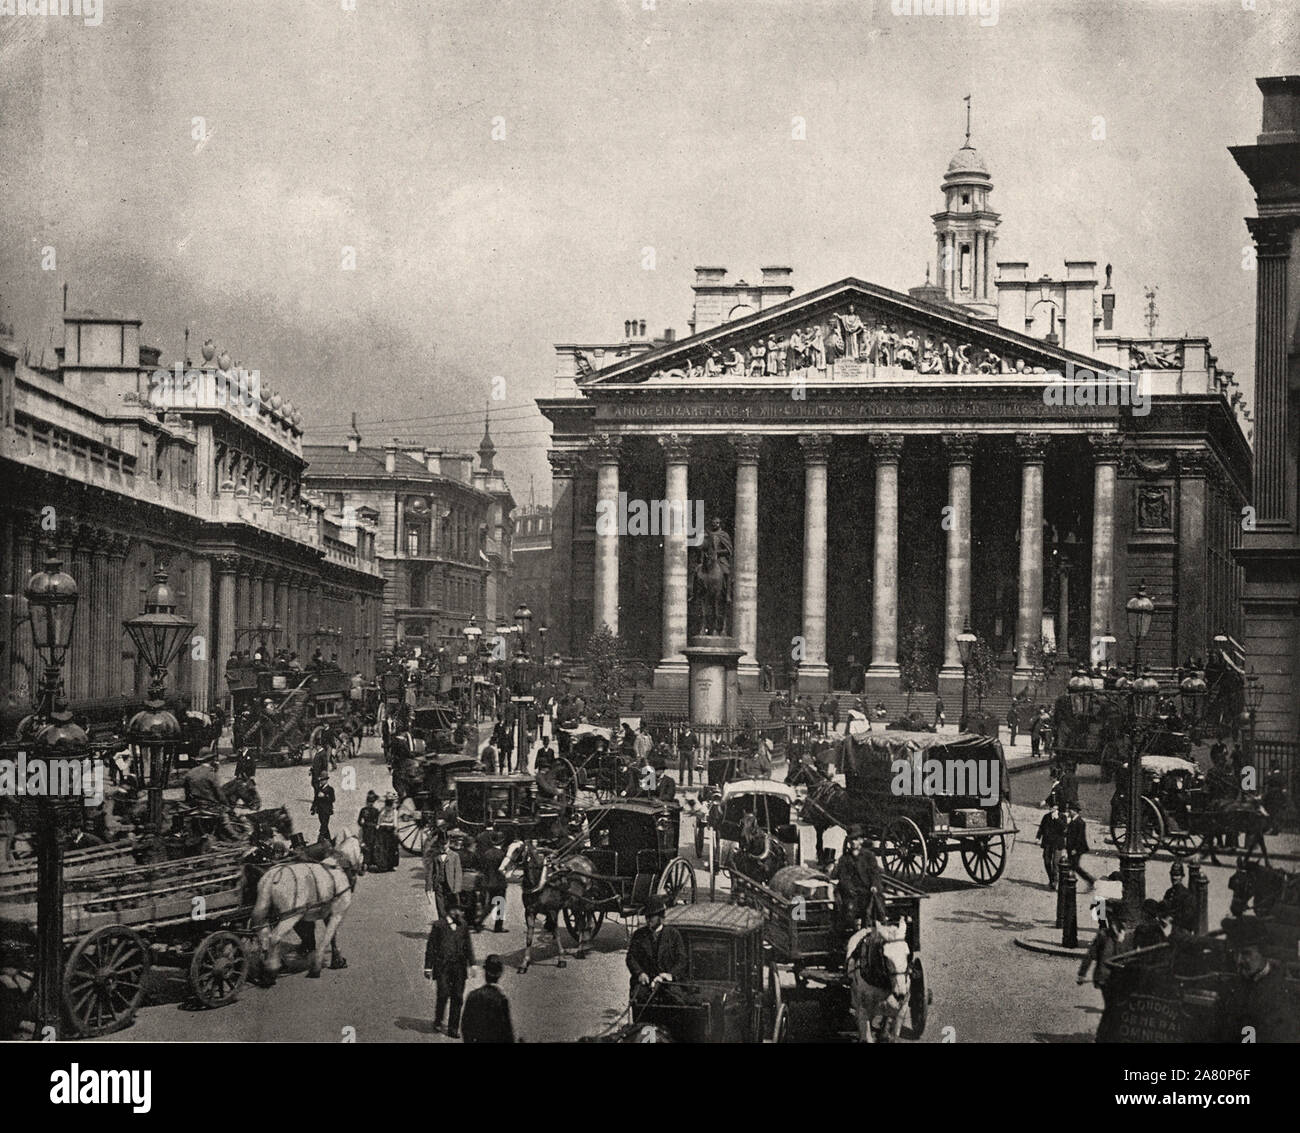 From 'The Descriptive Album of London' by George H Birch 1896 - Extracted text : ' ROYAL EXCHANGE.—Close to the Bank to which it forms a fitting adjunct. The present building was erected by Sir William Tite, and opened by the Queen in 1845, its predecessor having been burnt after an existence of scarcely 200 years, which, in its turn, had re-placed an older structure destroyed in the Great Fire, and originally built by Sir Thomas Gresham and opened by Queen Elizabeth. The Corinthian Portico is undoubtedly very fine and well proportioned, but the sky line is much injured by every conceivable de Stock Photo